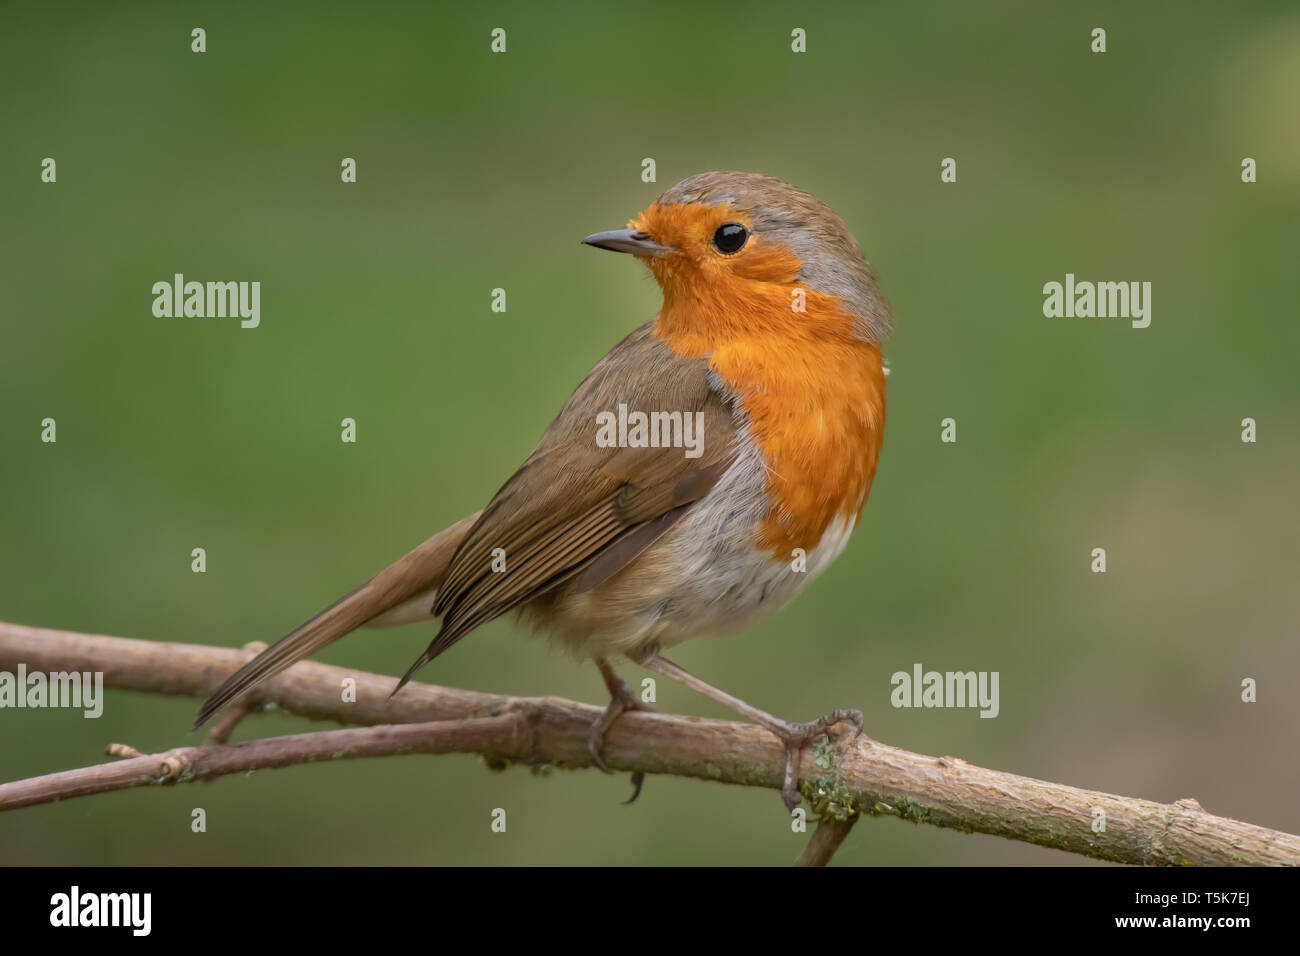 A close portrait of a robin perched on a branch looking behind over its shoulder against a natural green background Stock Photo